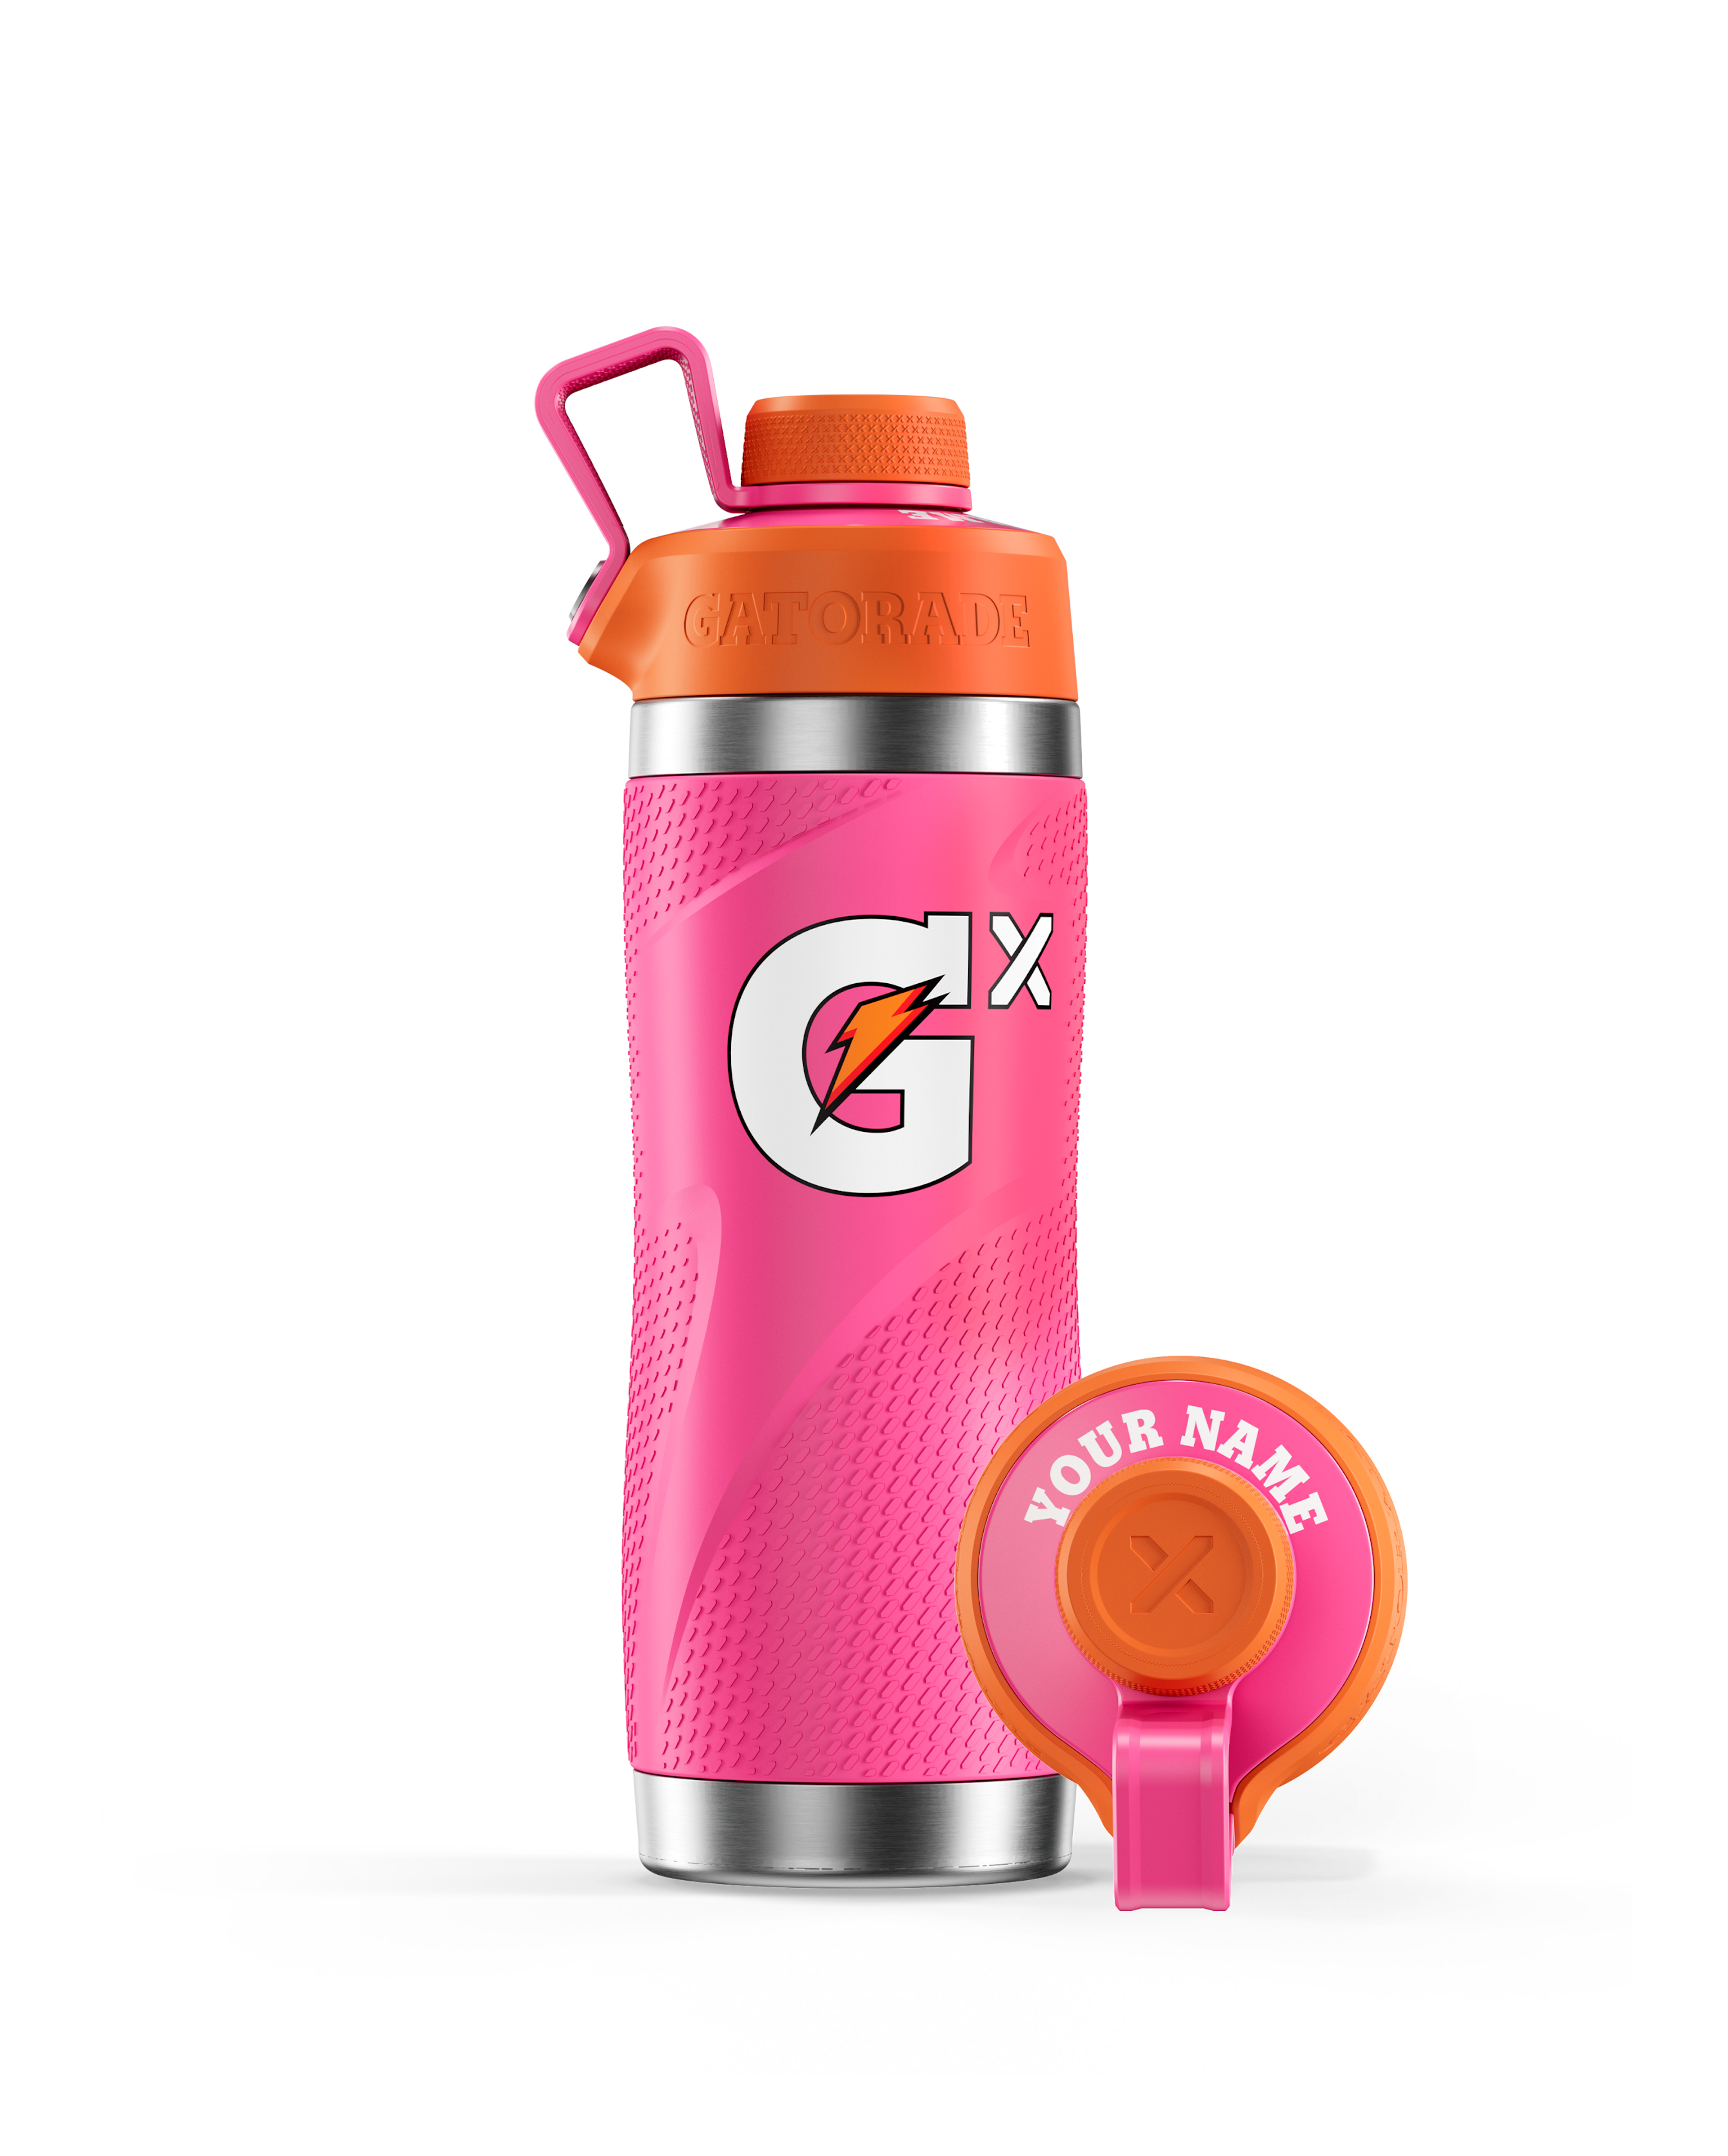 https://www.datocms-assets.com/101859/1697487201-gx-stainless-steel-bottles_pink_product-tile_2680x3344.png?auto=format&fit=max&w=3840